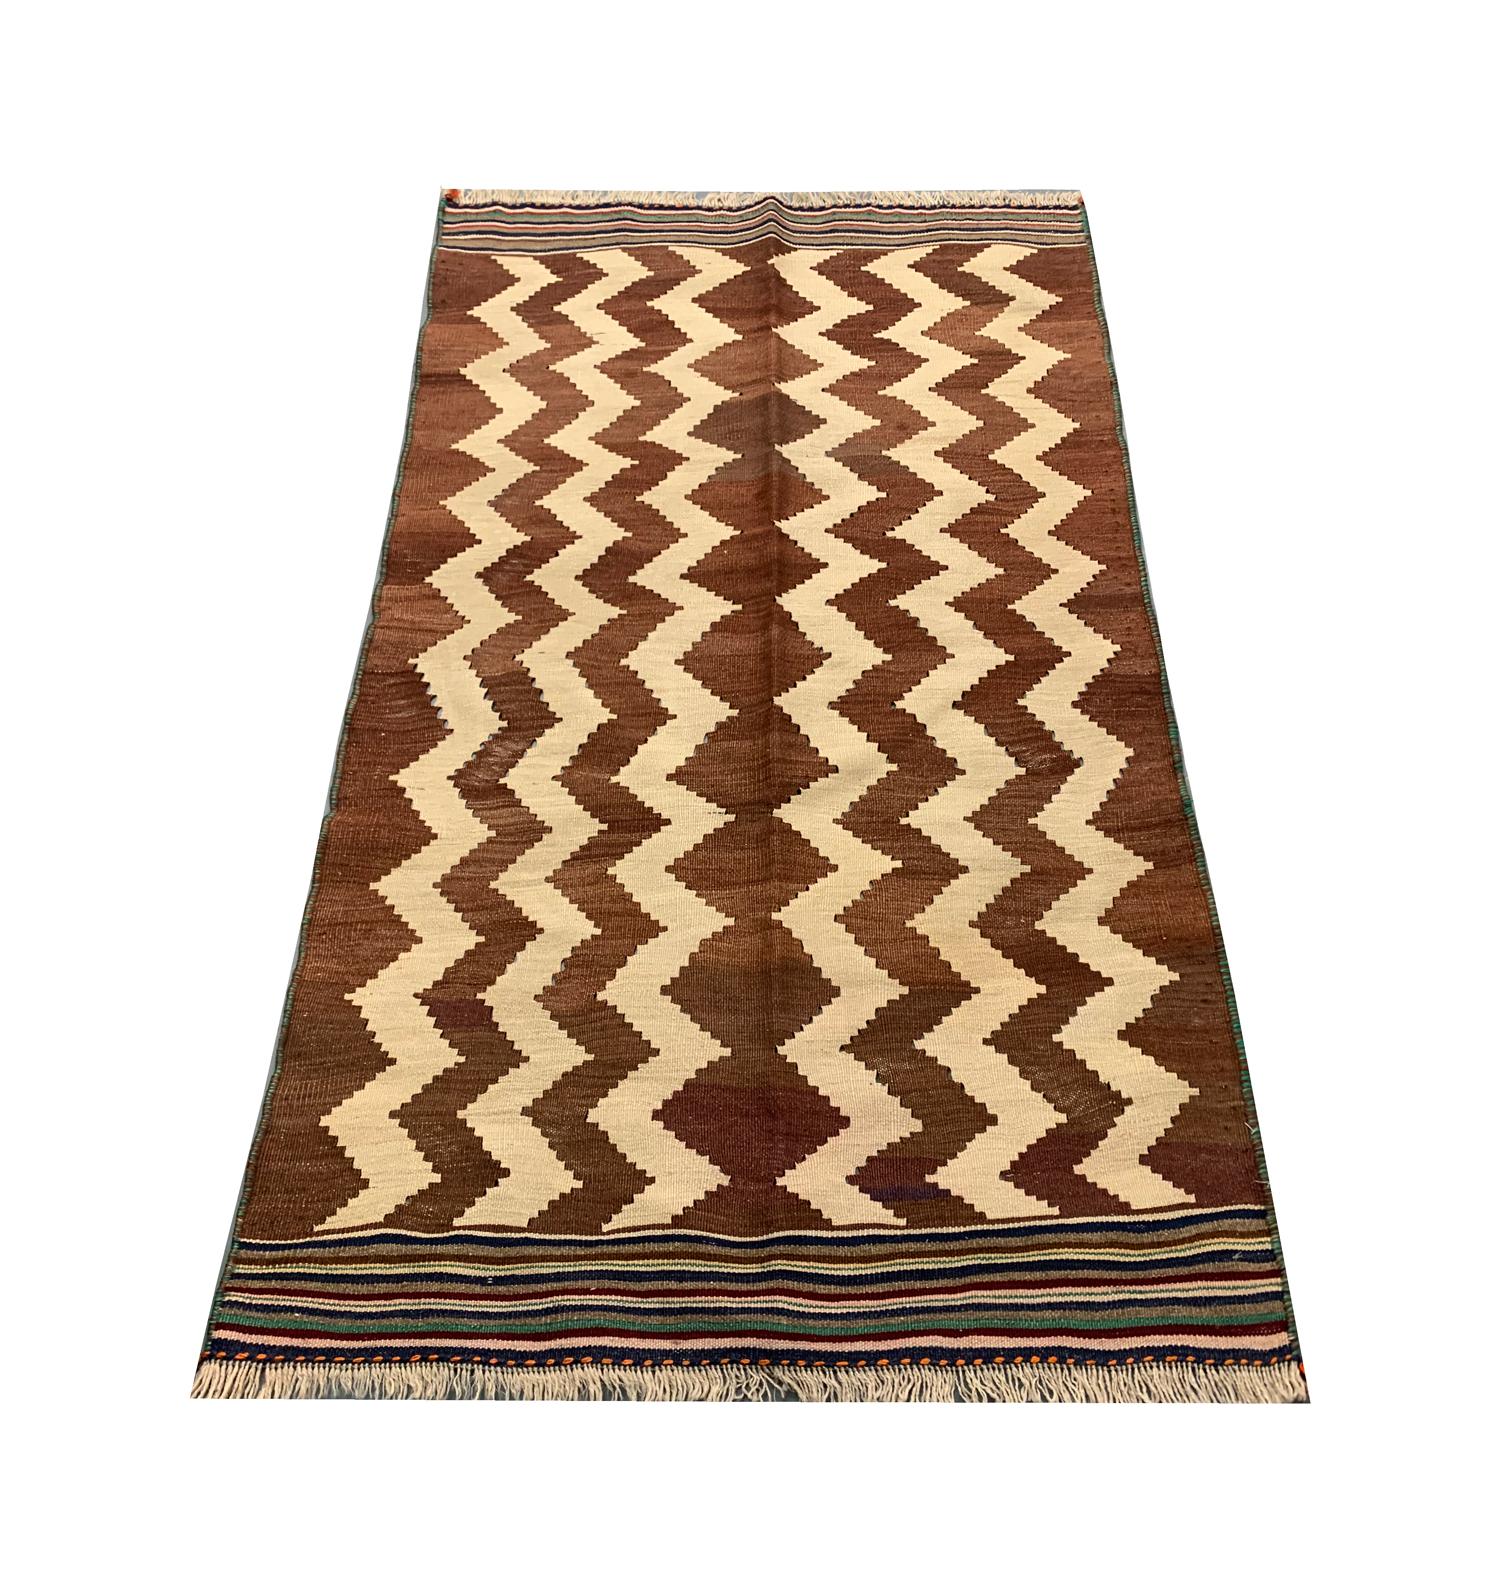 Luxury Zig Zag Collection Small Extra Large Living Room Floor Carpet Rug Brown 